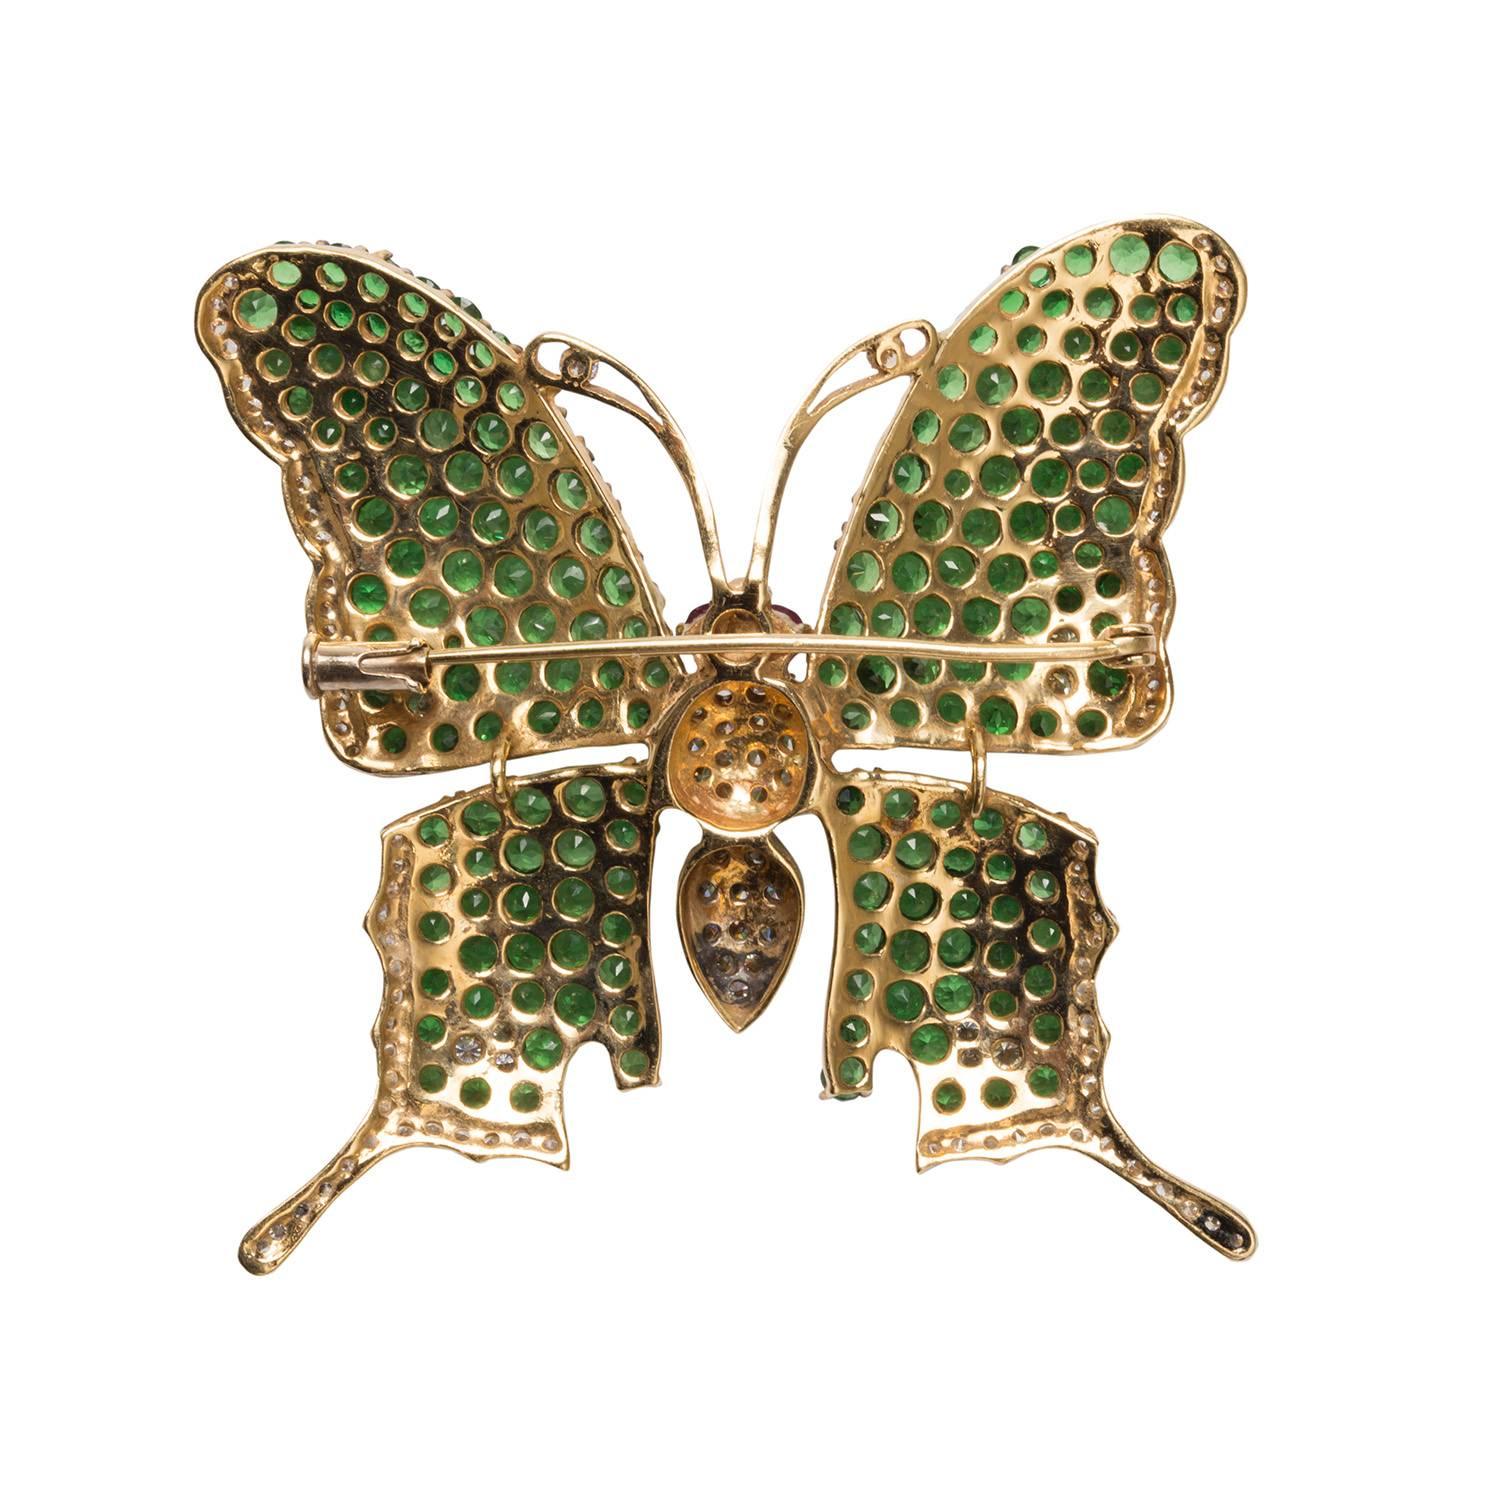 This is a stylized butterfly brooch made of tsavorite, garnet and diamonds set in 18k yellow gold.